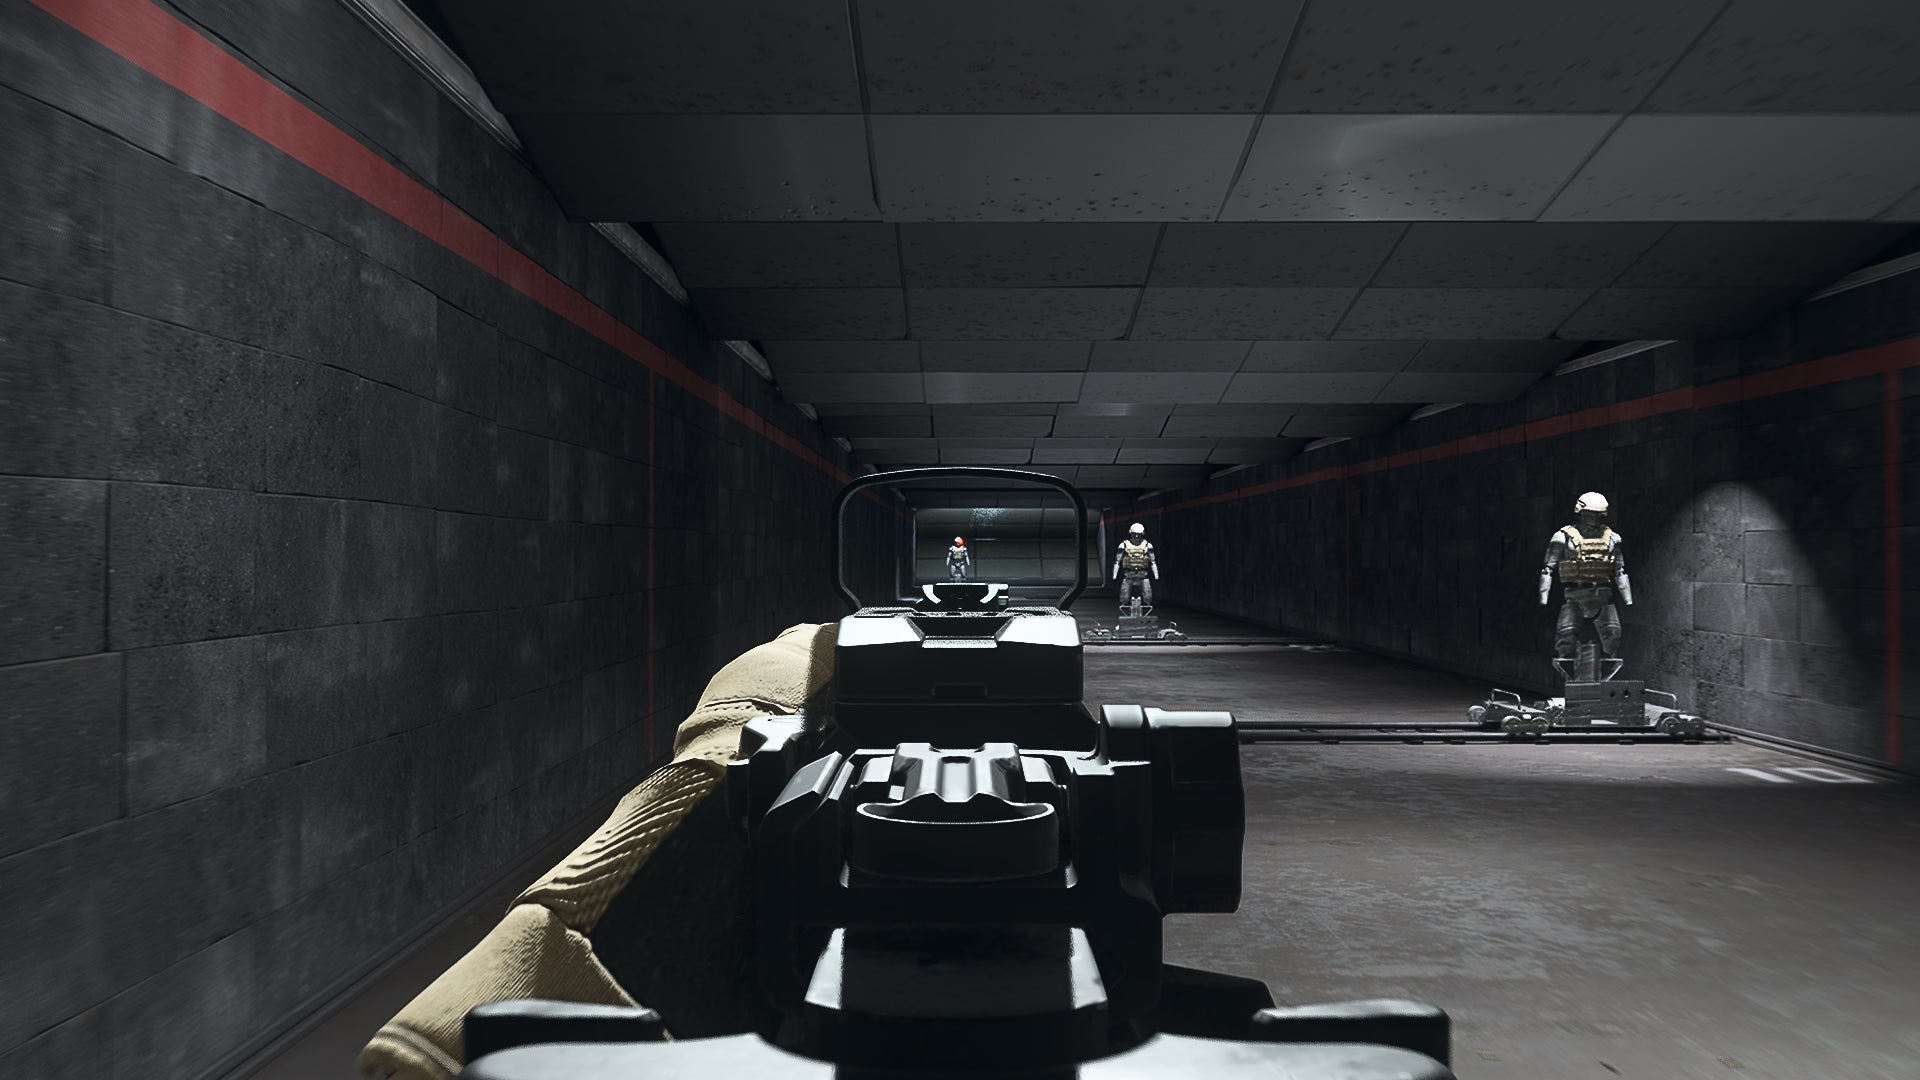 The player in Warzone 2.0 aims at a training dummy using the Slimline Pro optic attachment.